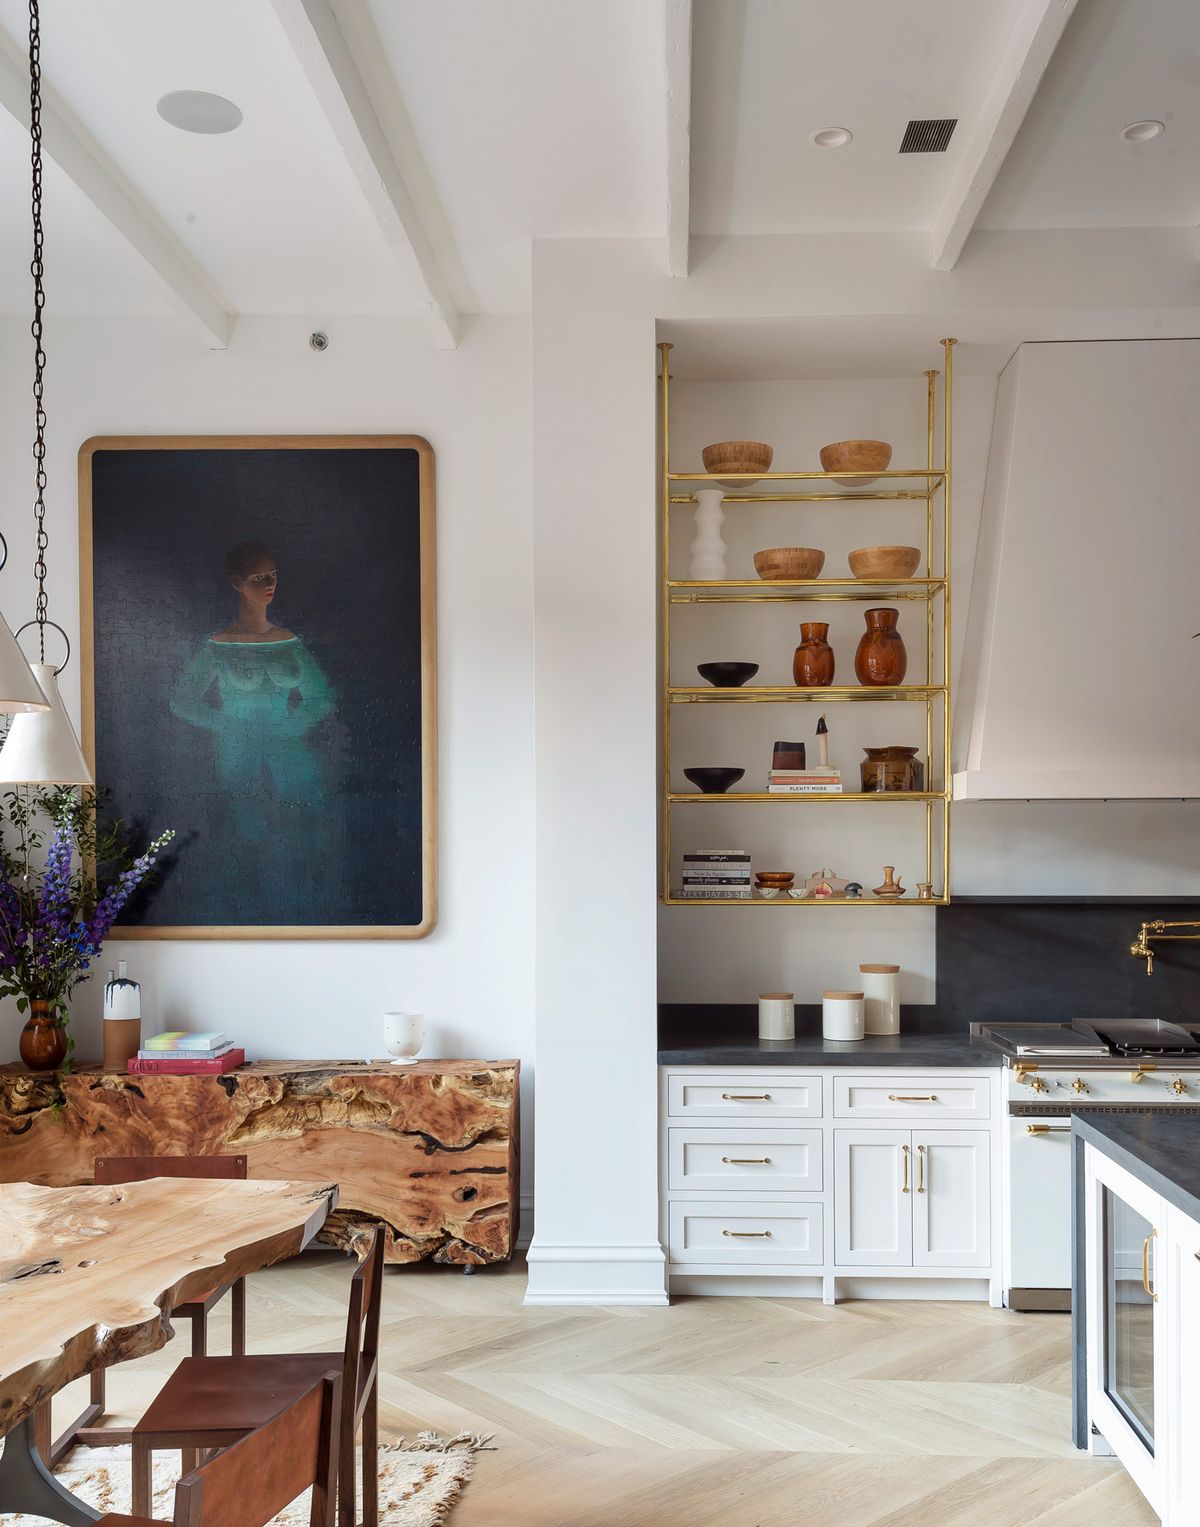 This historic brownstone in Brooklyn has been given a fresh and vibrant new lease of life